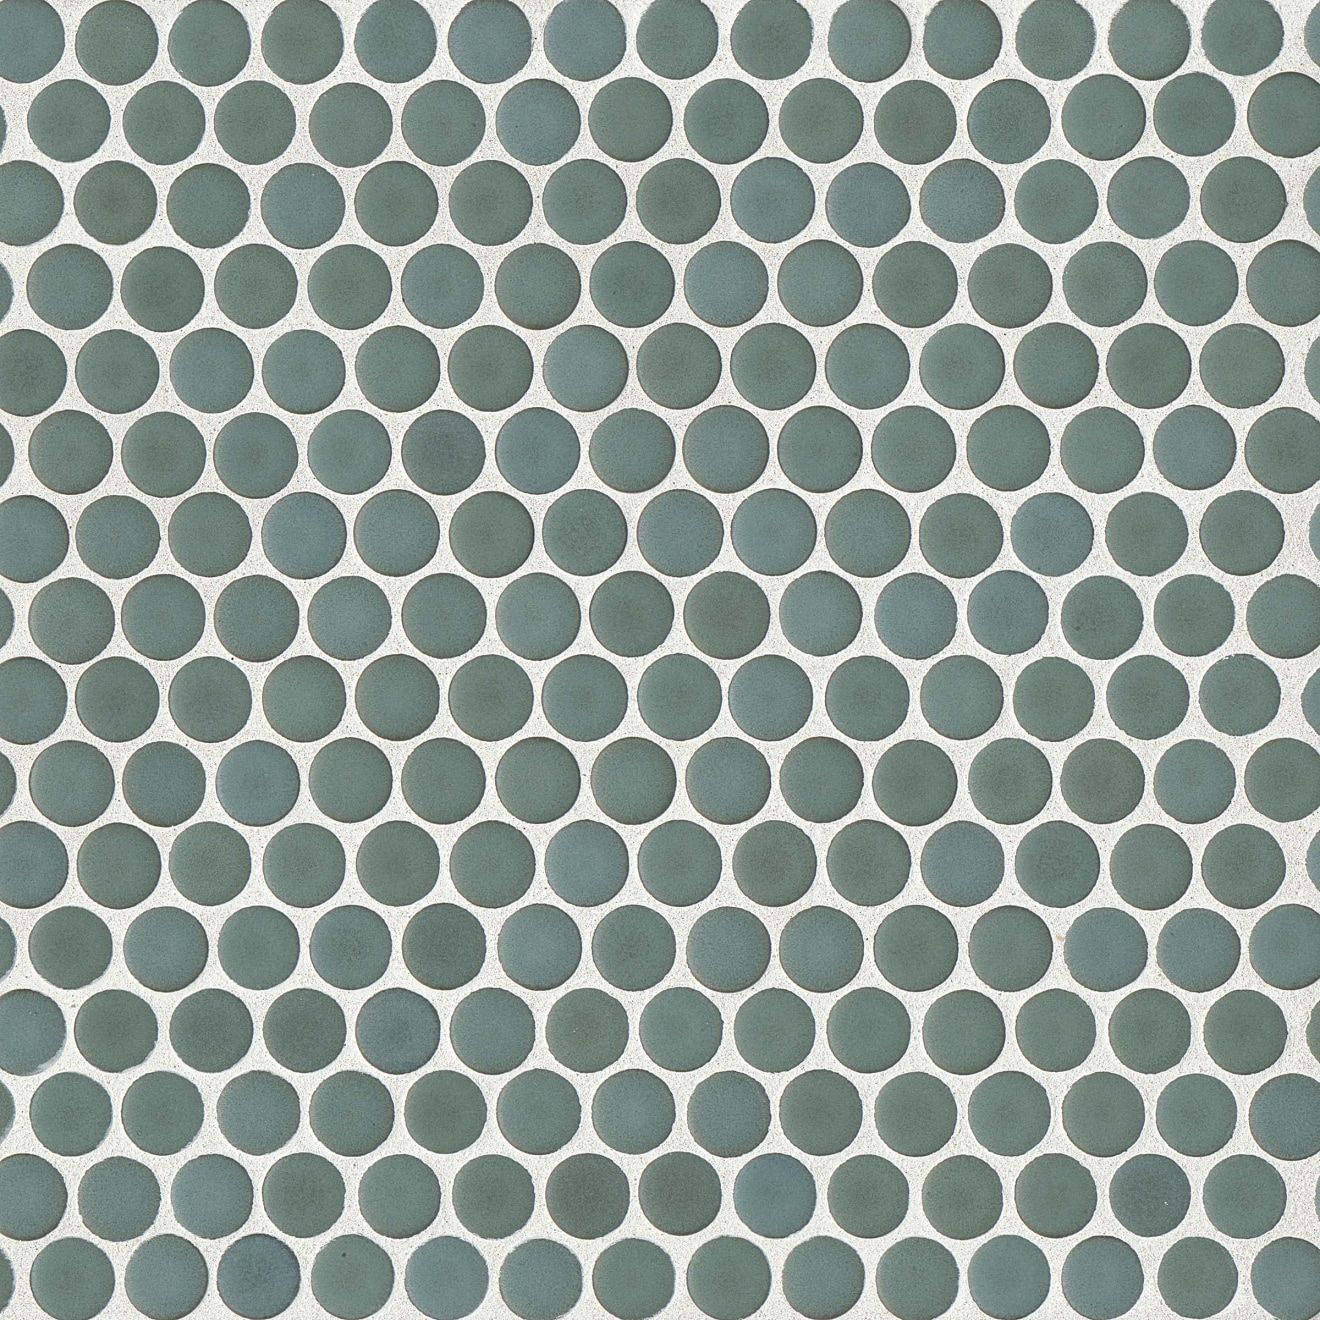 360 3/4" x 3/4" Floor & Wall Mosaic in Silver Sage | Bedrosians Tile & Stone